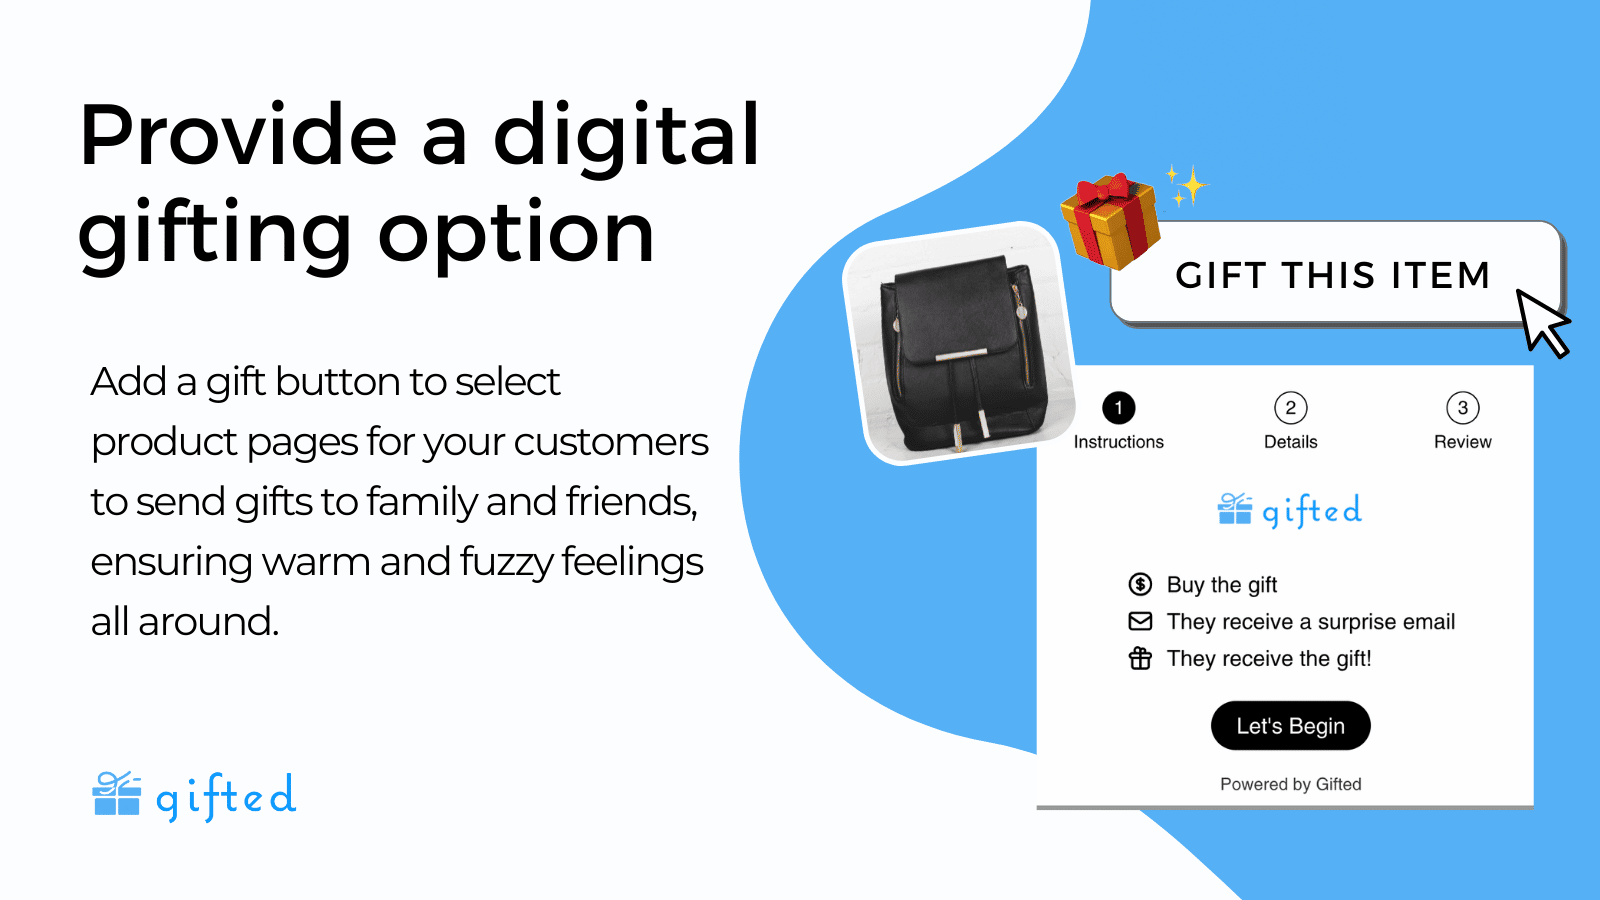 Gifted: Online Gift Experience